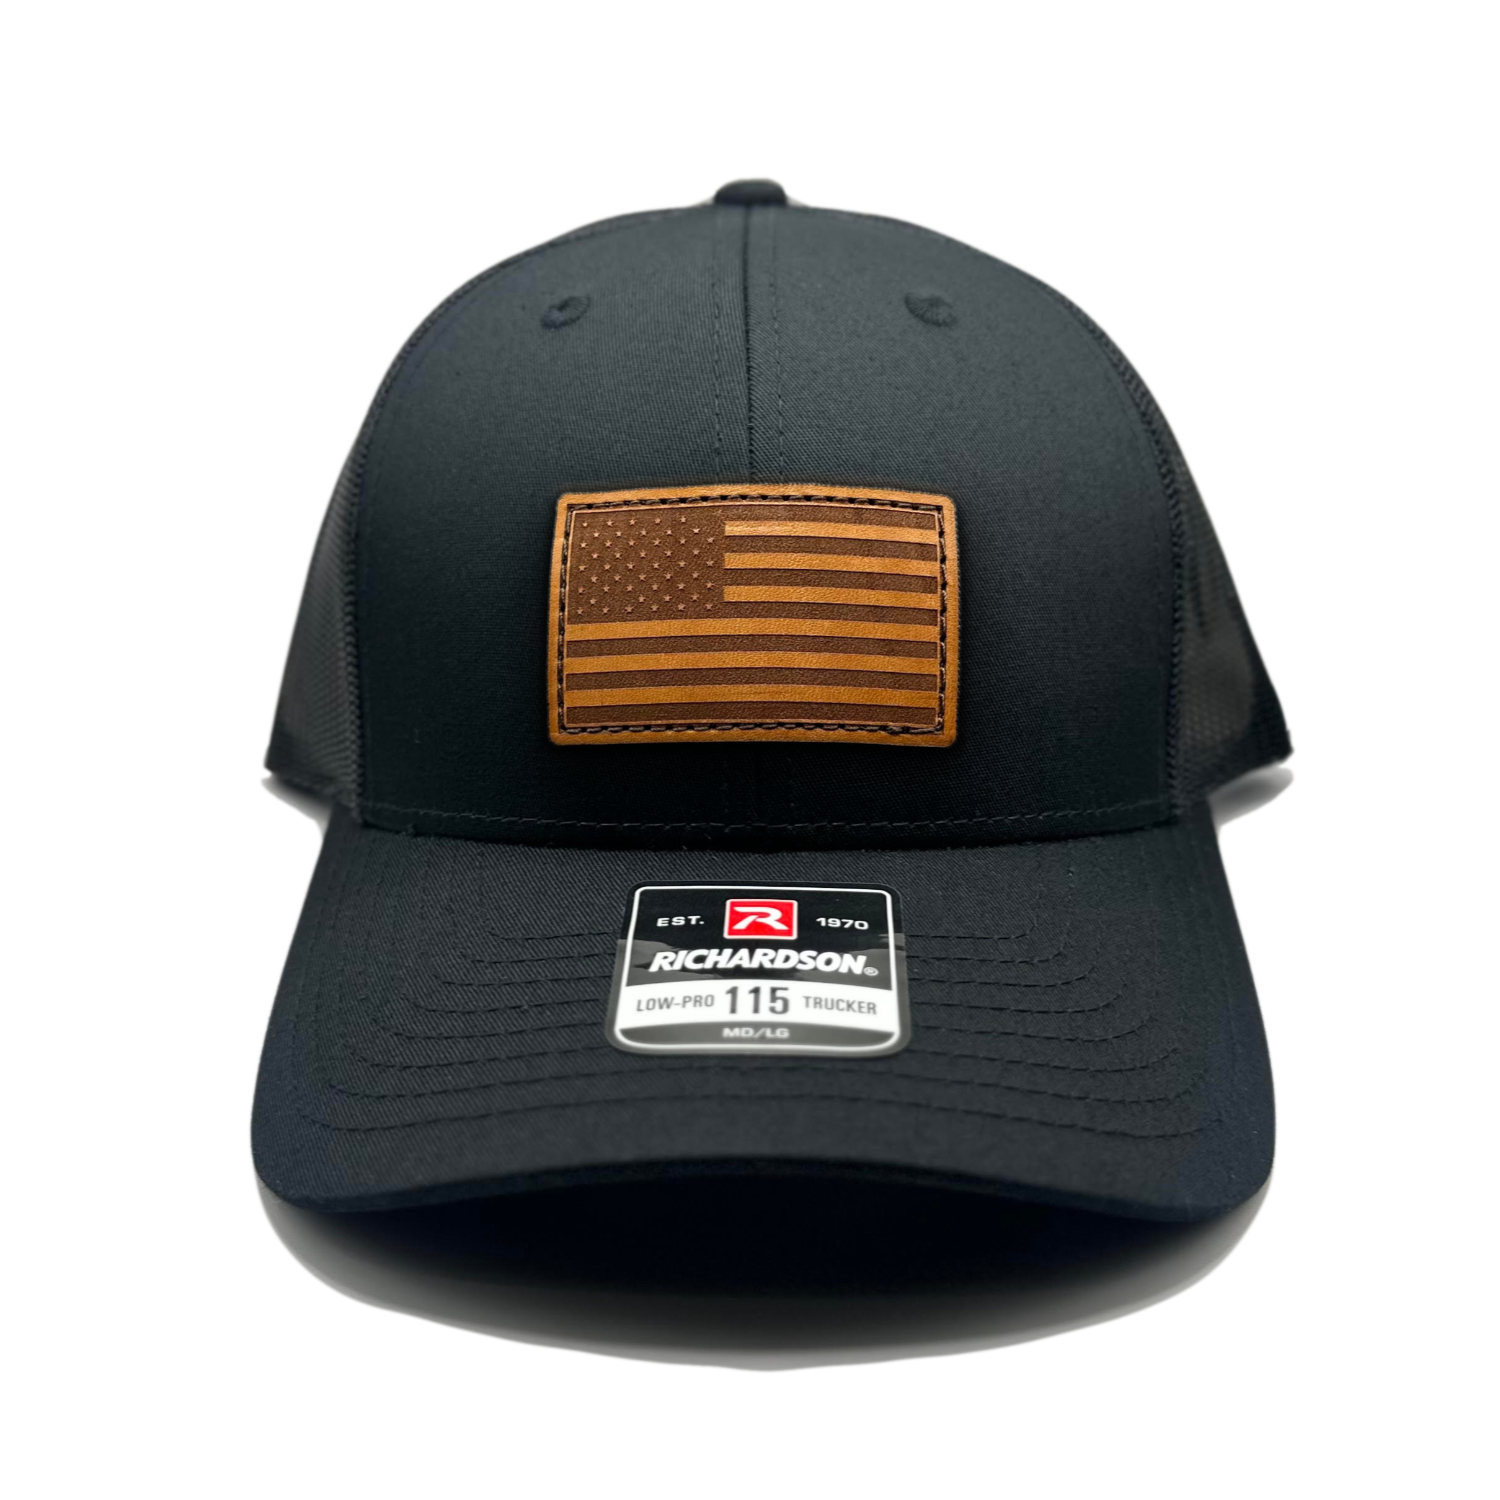 Black Richardson 115 hat featuring a distinctive American flag patch crafted from genuine leather. This unique patch is laser engraved and securely sewn onto the hat. The Richardson 115 is a low profile trucker style hat, adjustable to fit small or M/L sizes, making it a versatile and fashionable accessory for any occasion.